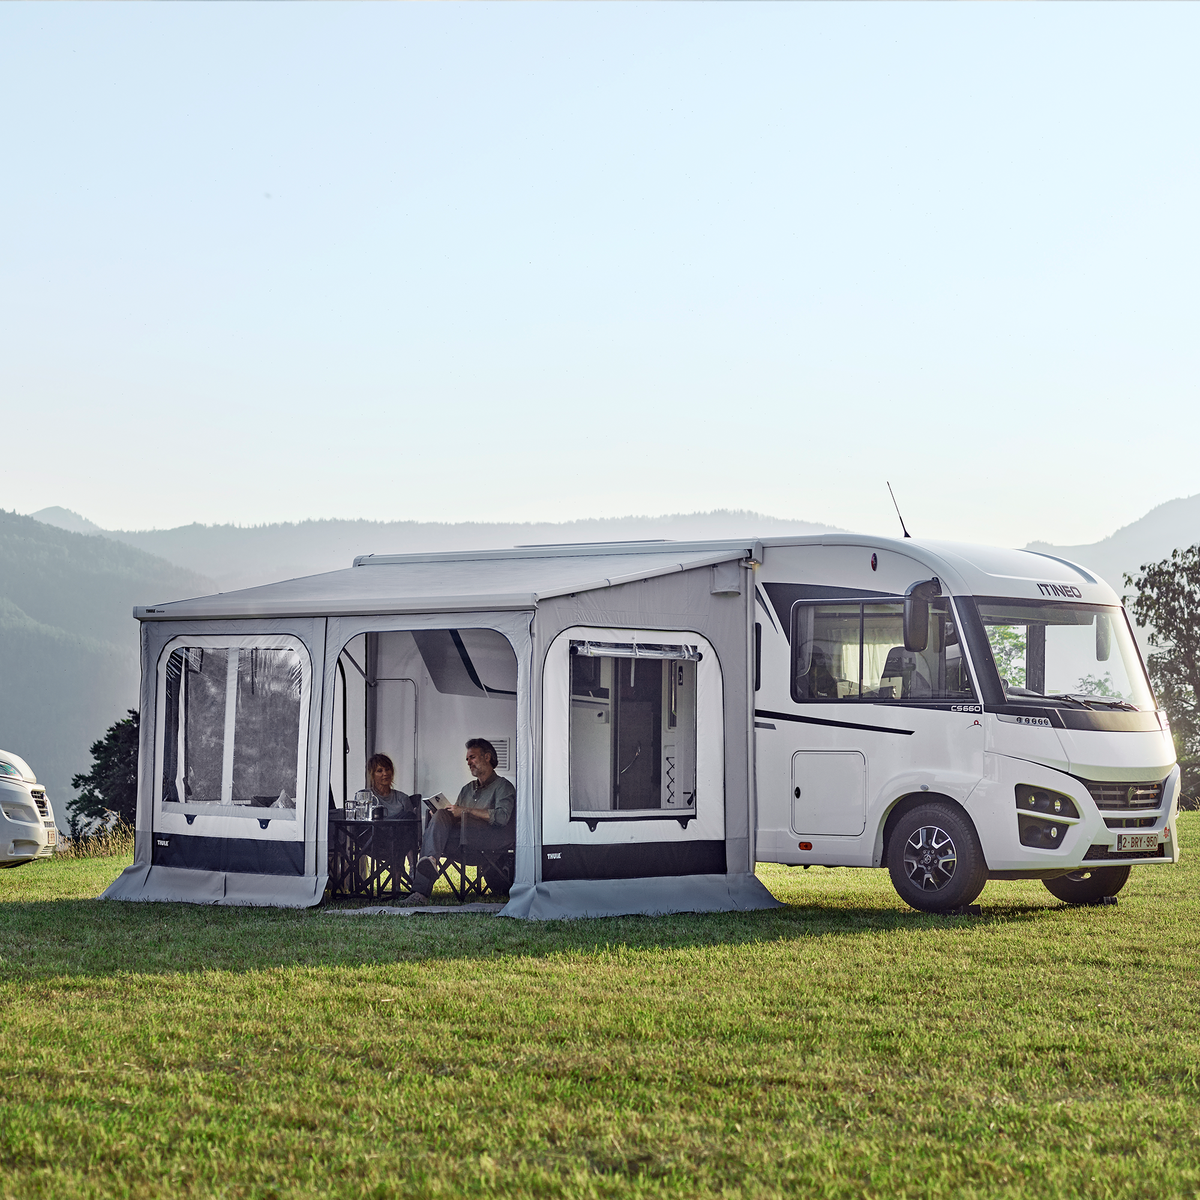 A motorhome with a Thule Panorama rv tent is parked in a field next to a van with a pop-up roof.